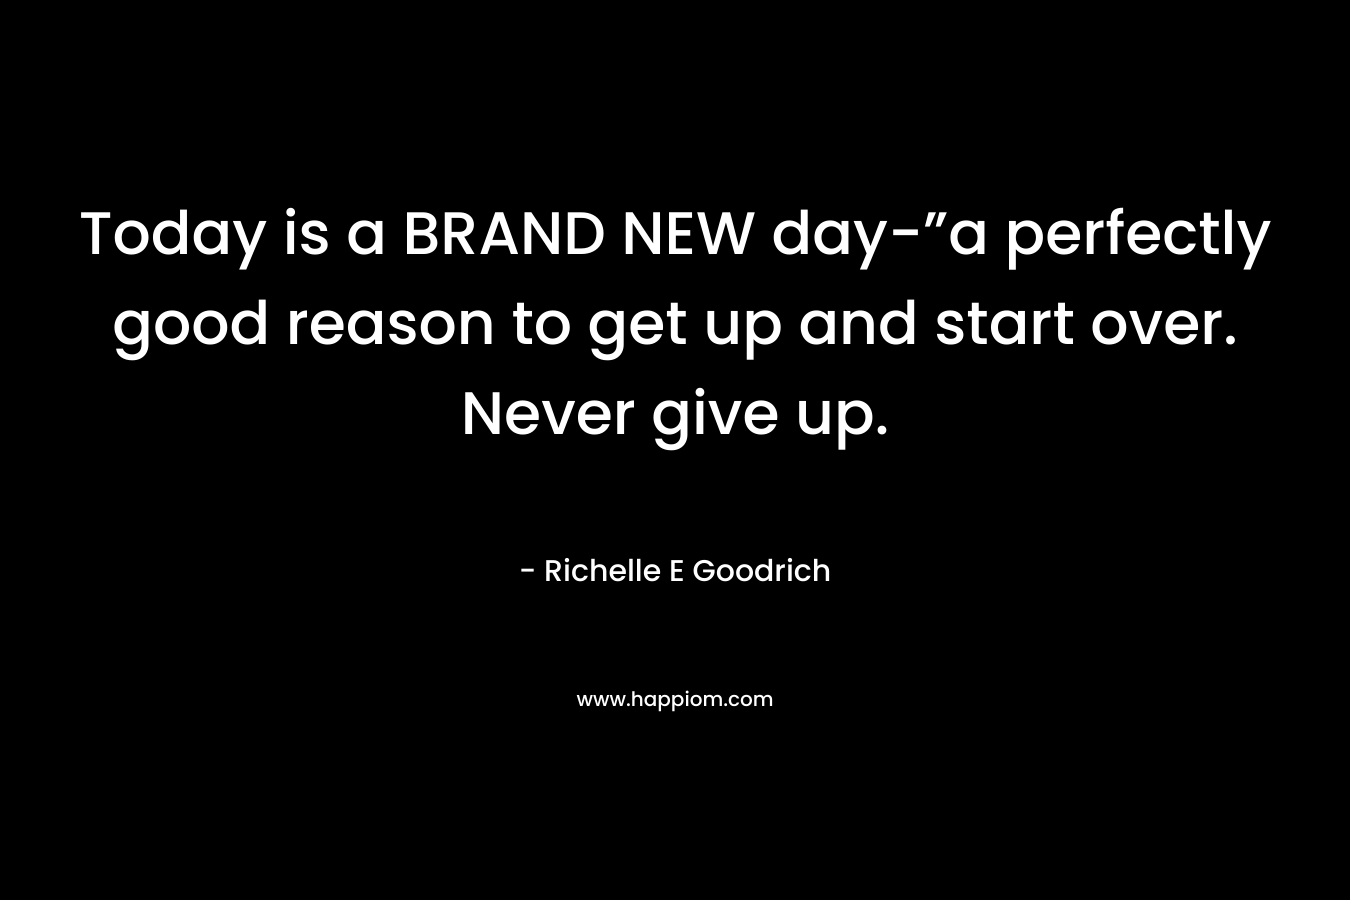 Today is a BRAND NEW day-”a perfectly good reason to get up and start over. Never give up.